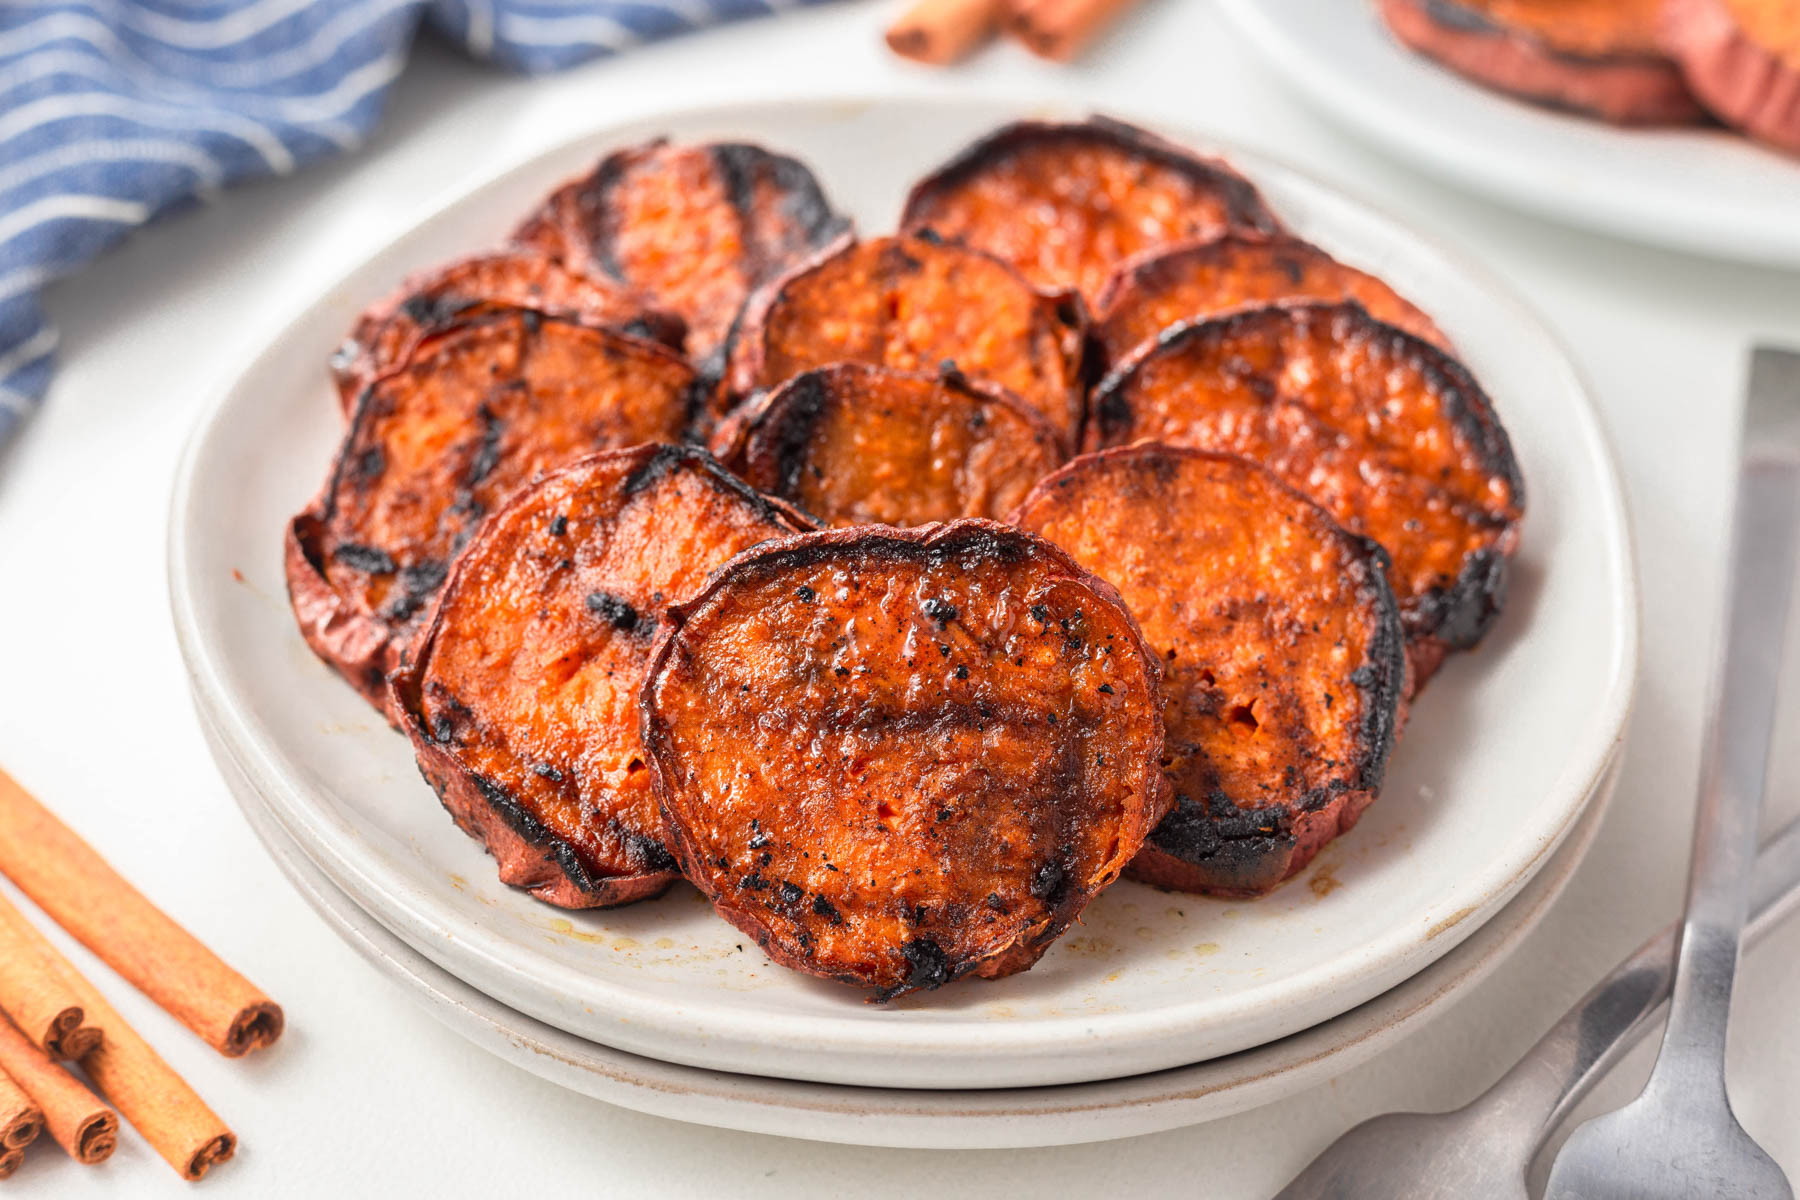 Grilled Sweet potatoes served on a white platter.